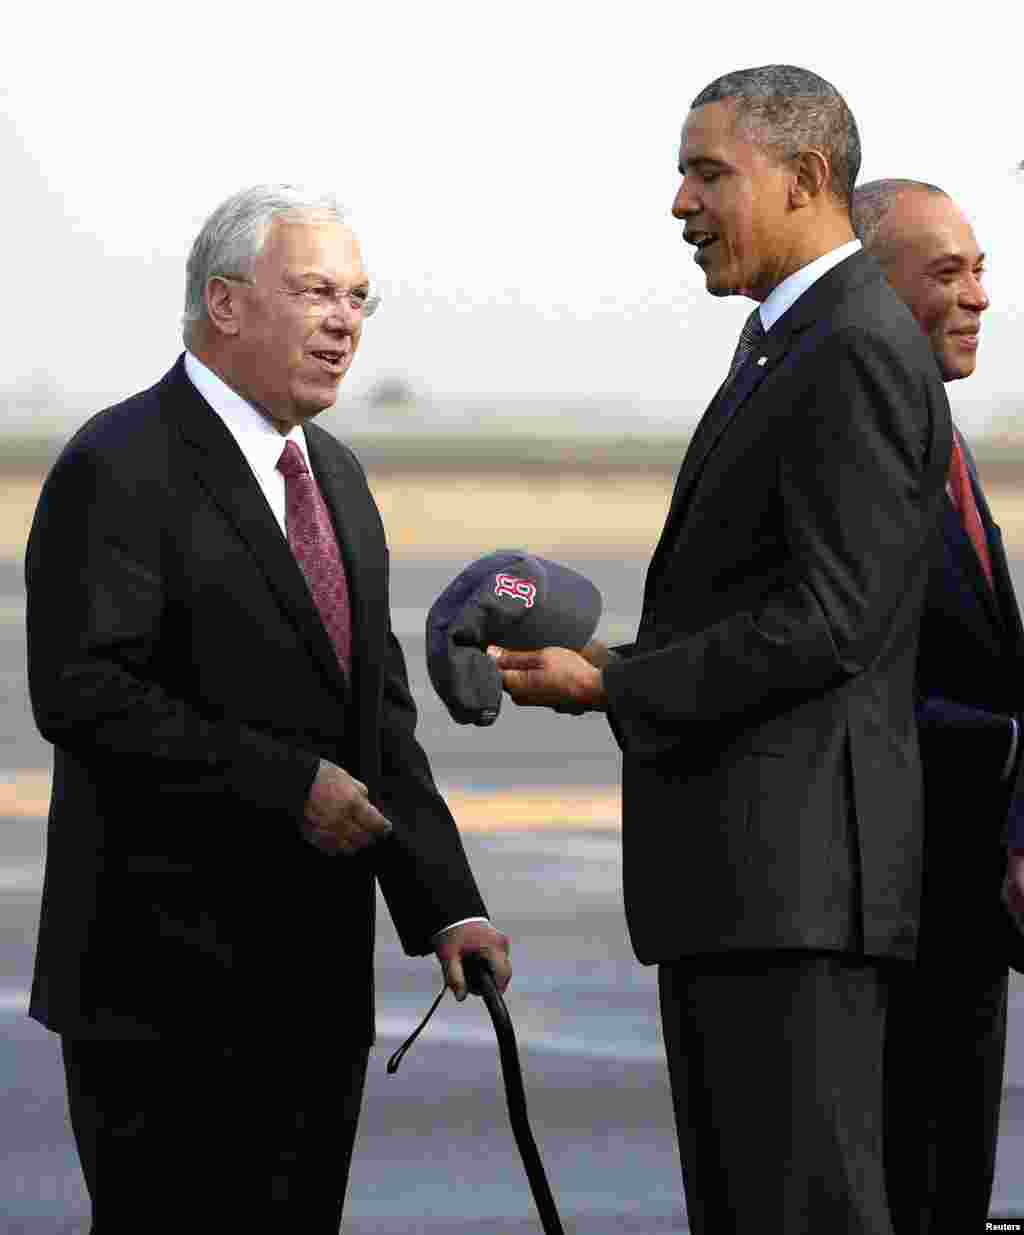 U.S. President Barack Obama is given a Red Sox baseball cap by Boston Mayor Thomas Menino upon his arrival in Boston October 30, 2013. Fans in Boston could be celebrating a World Series title at Fenway Park for the first time in 95 years when the Red Sox 